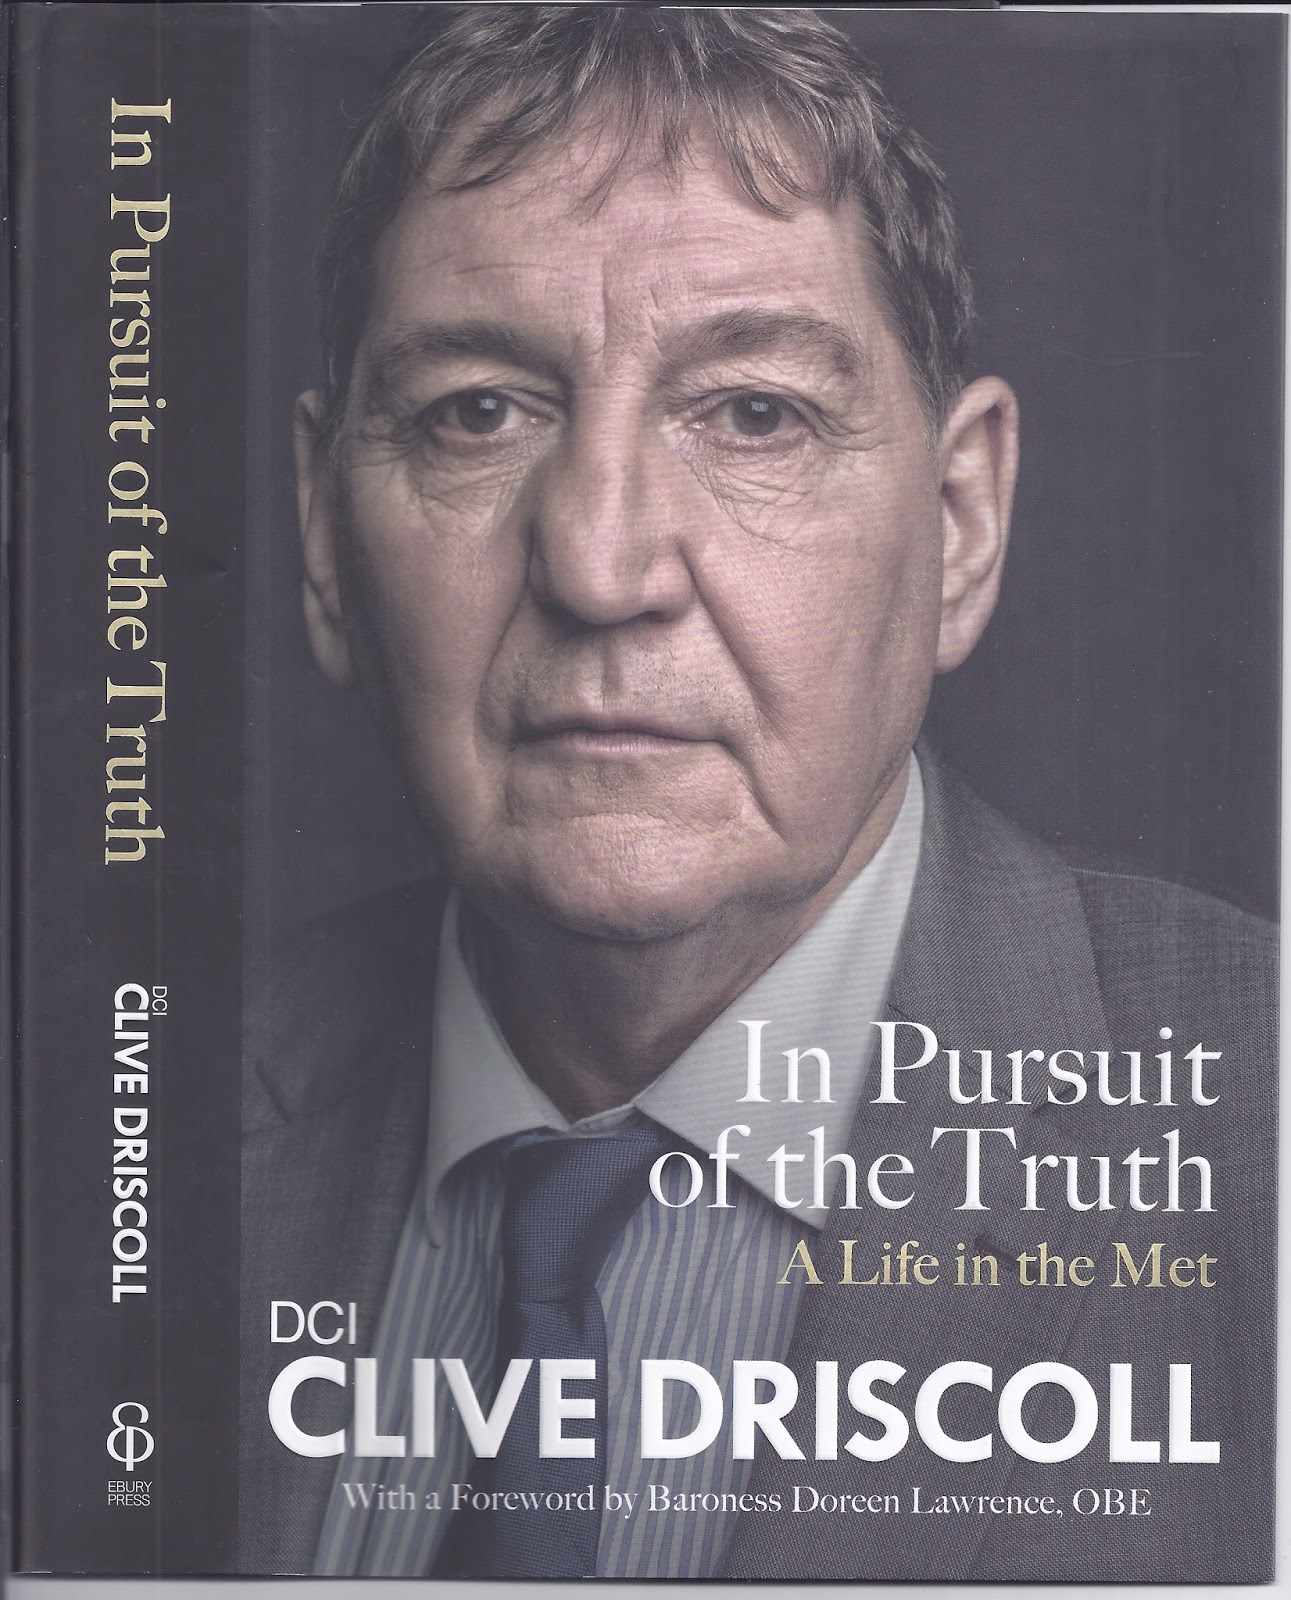 Reading This Book, Cover to Cover ...: Review: Clive Driscoll, In ...